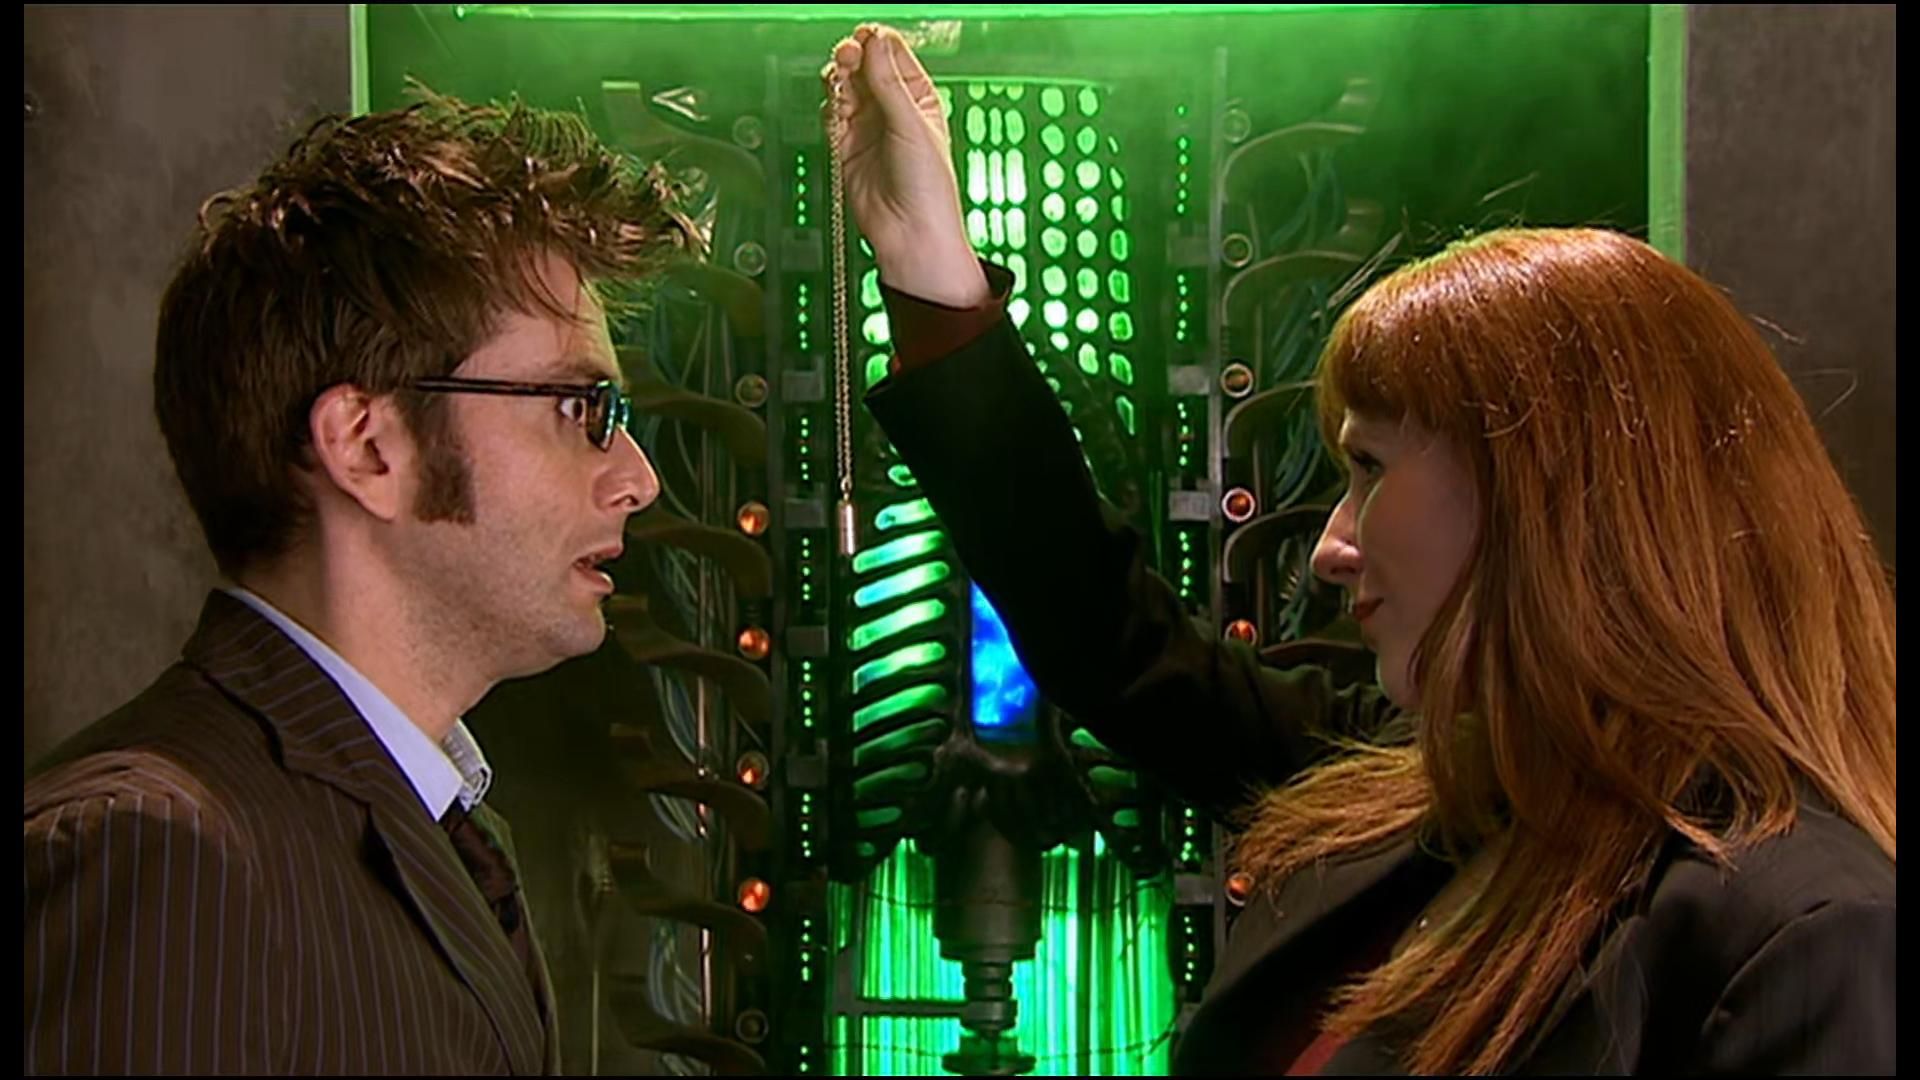 ‘Doctor Who’ Russell T Davies Best Episodes Ranked